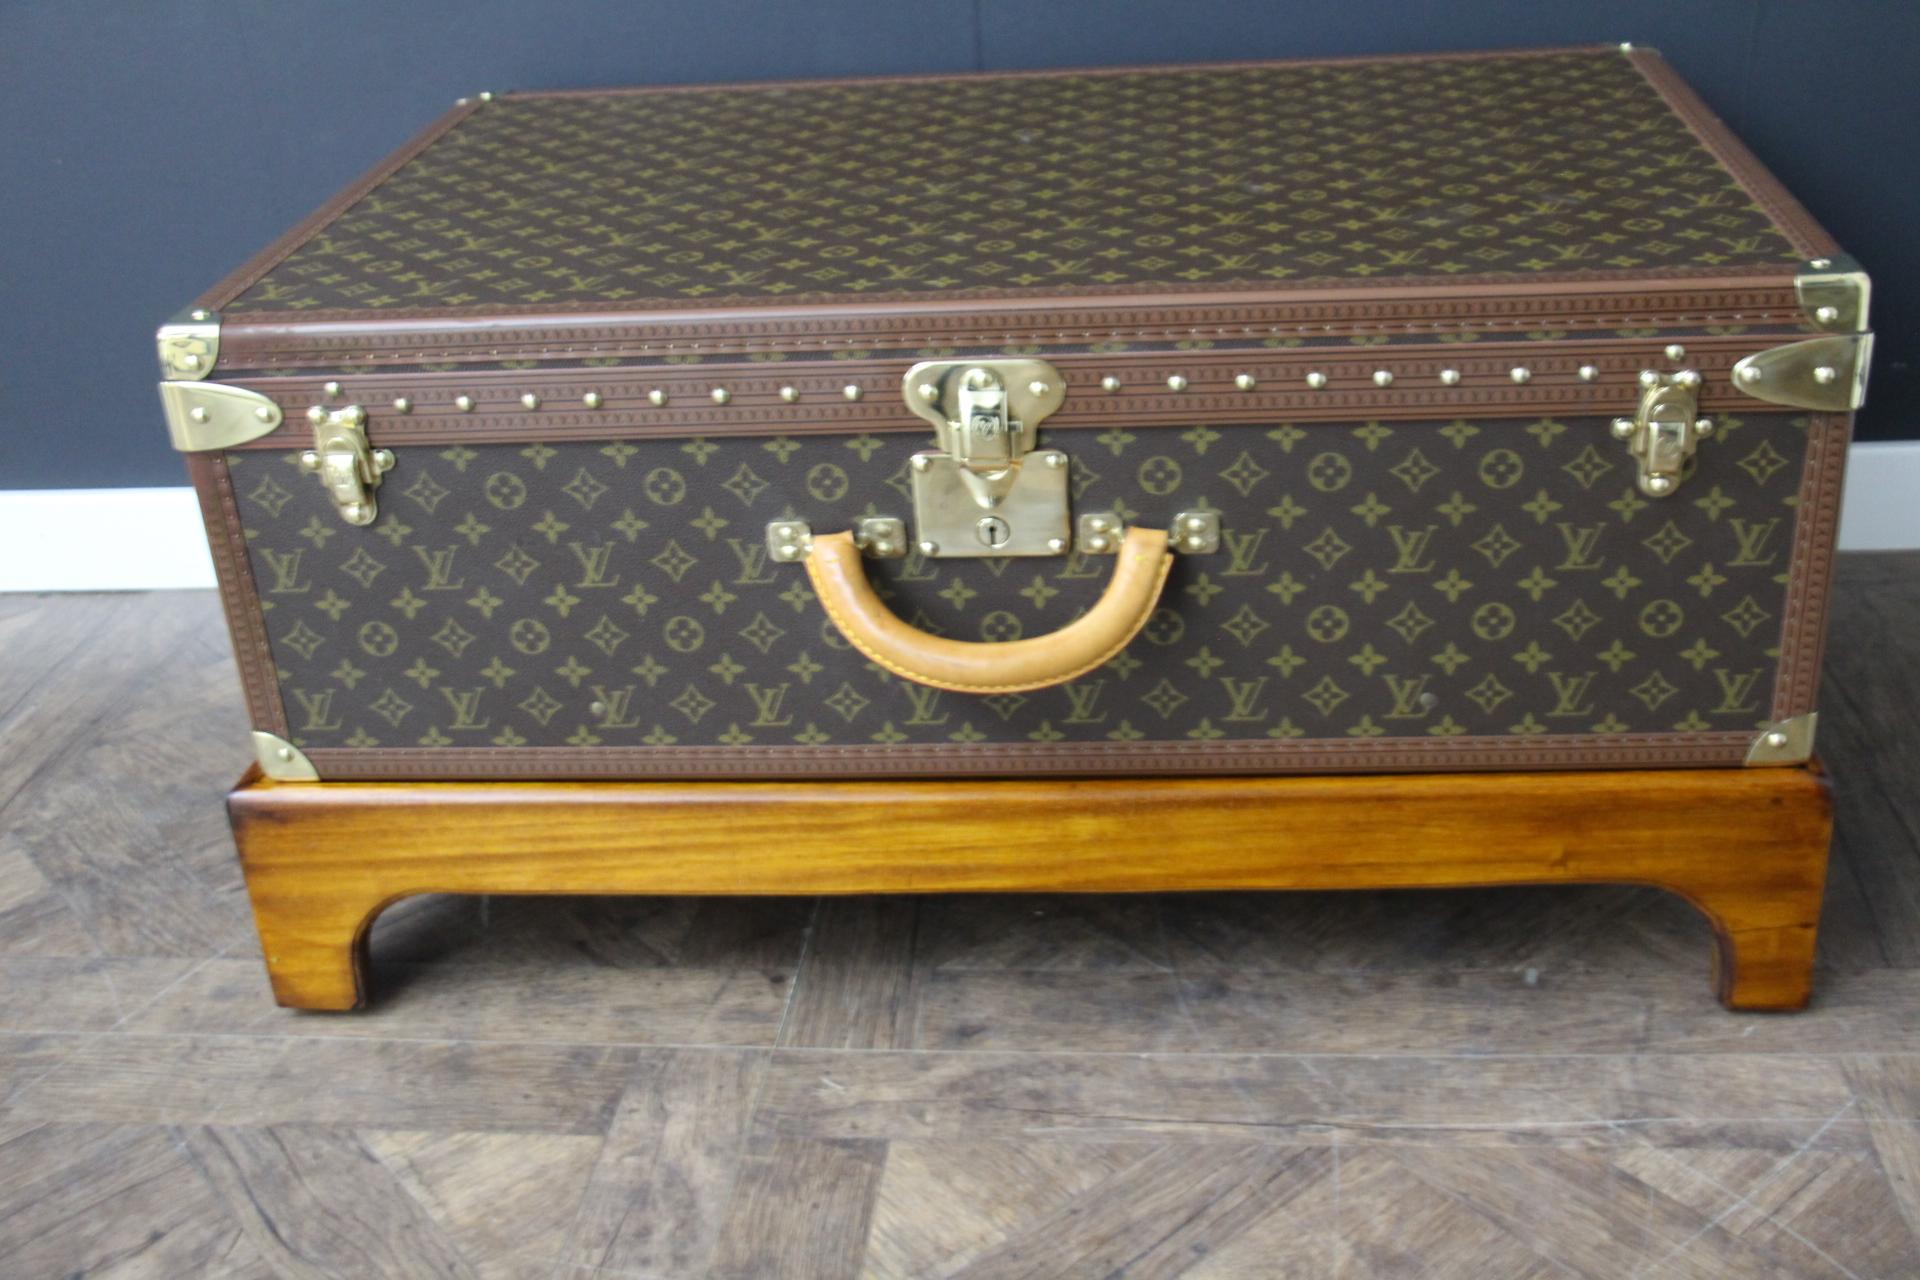 This piece of luggage is a magnificent Louis Vuitton Alzer monogramm suitcase. This 80 cm suitcase is the largest and the most luxury one made by Louis Vuitton. It features all Louis Vuitton stamped solid brass fittings: locks, clasps and studs.